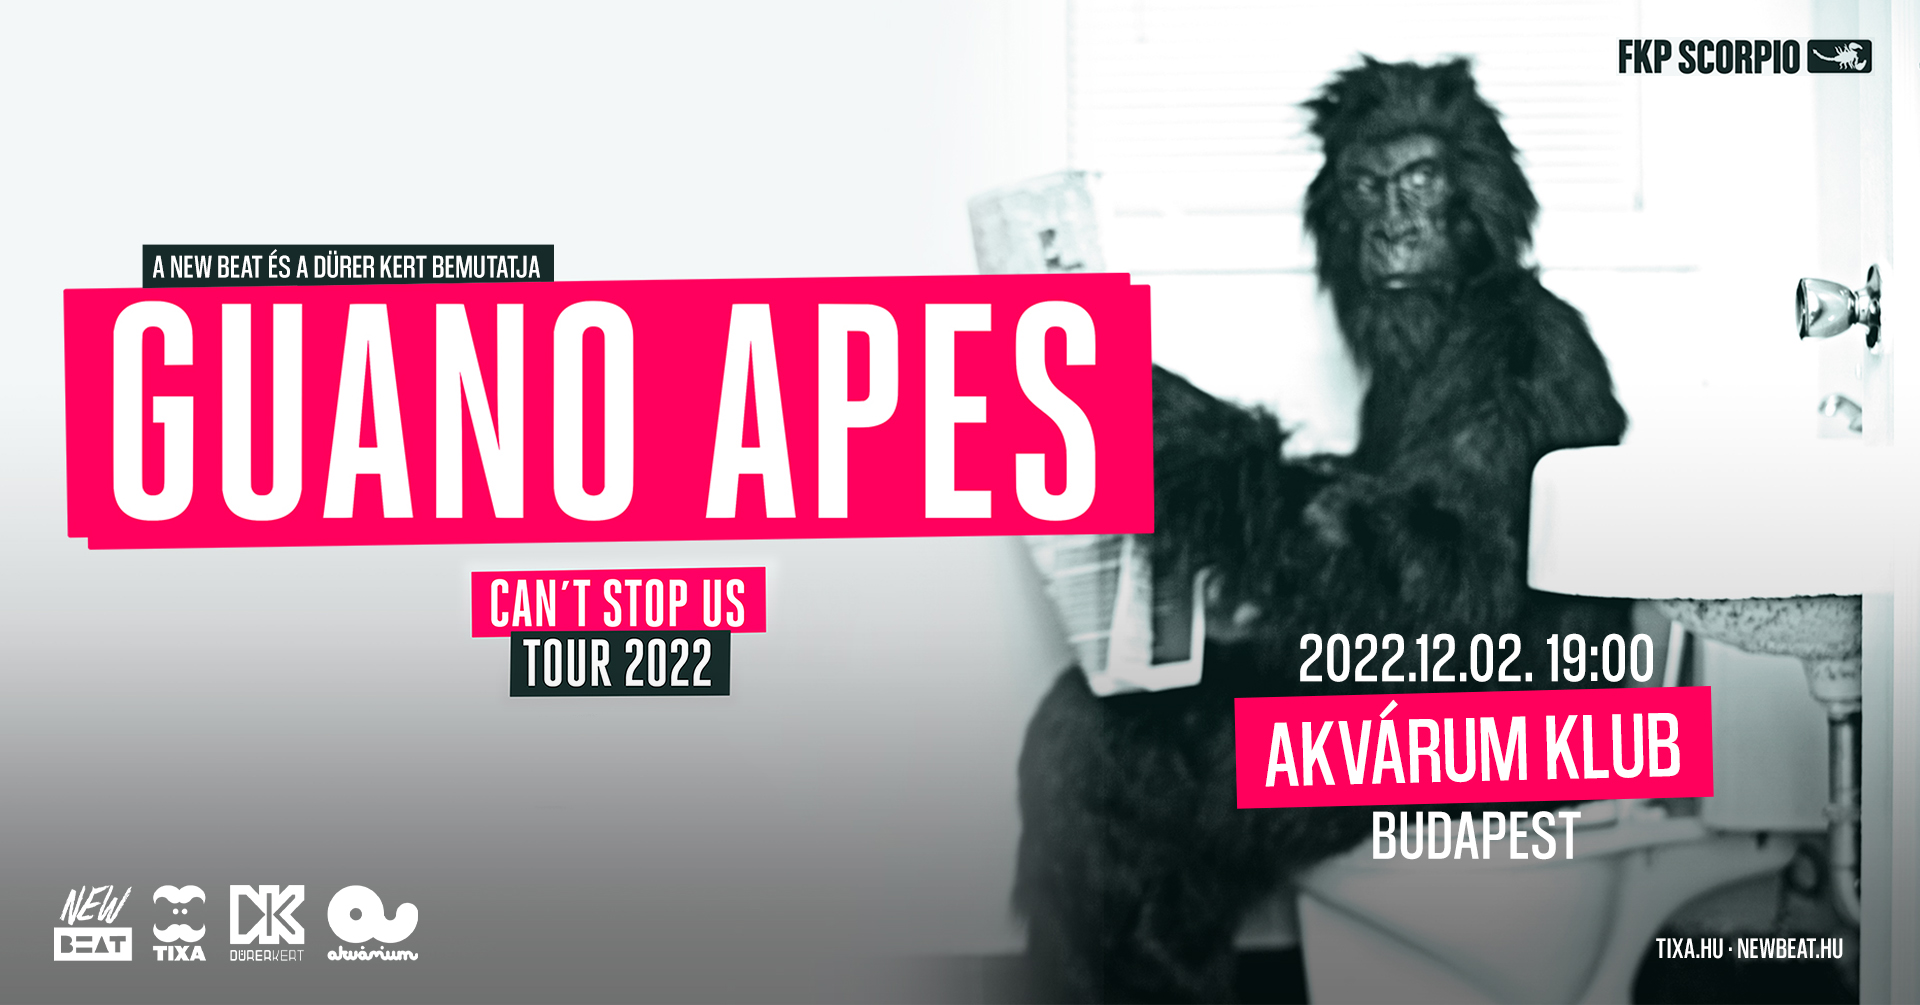 guano apes can't stop us tour 2022